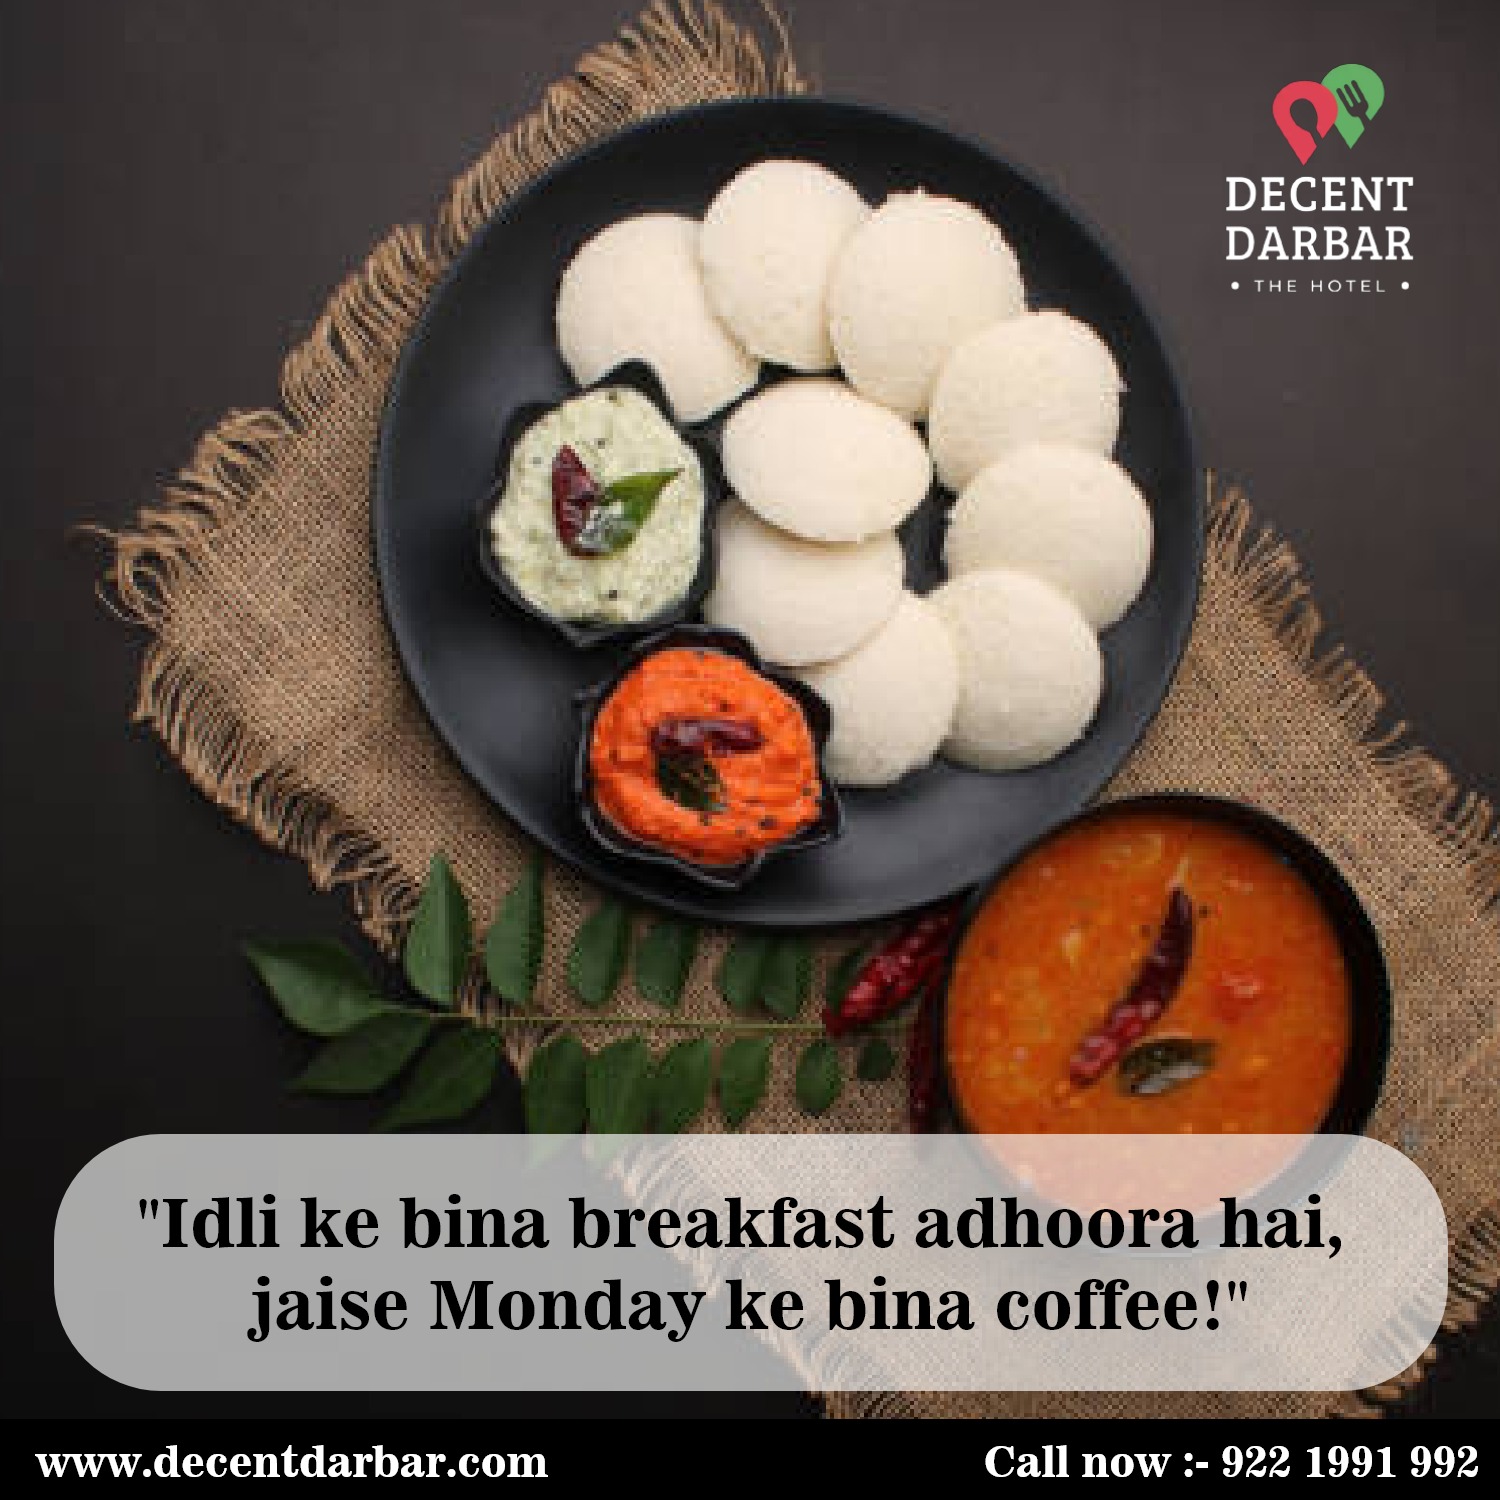 "Taste the tradition with every bite of idli."